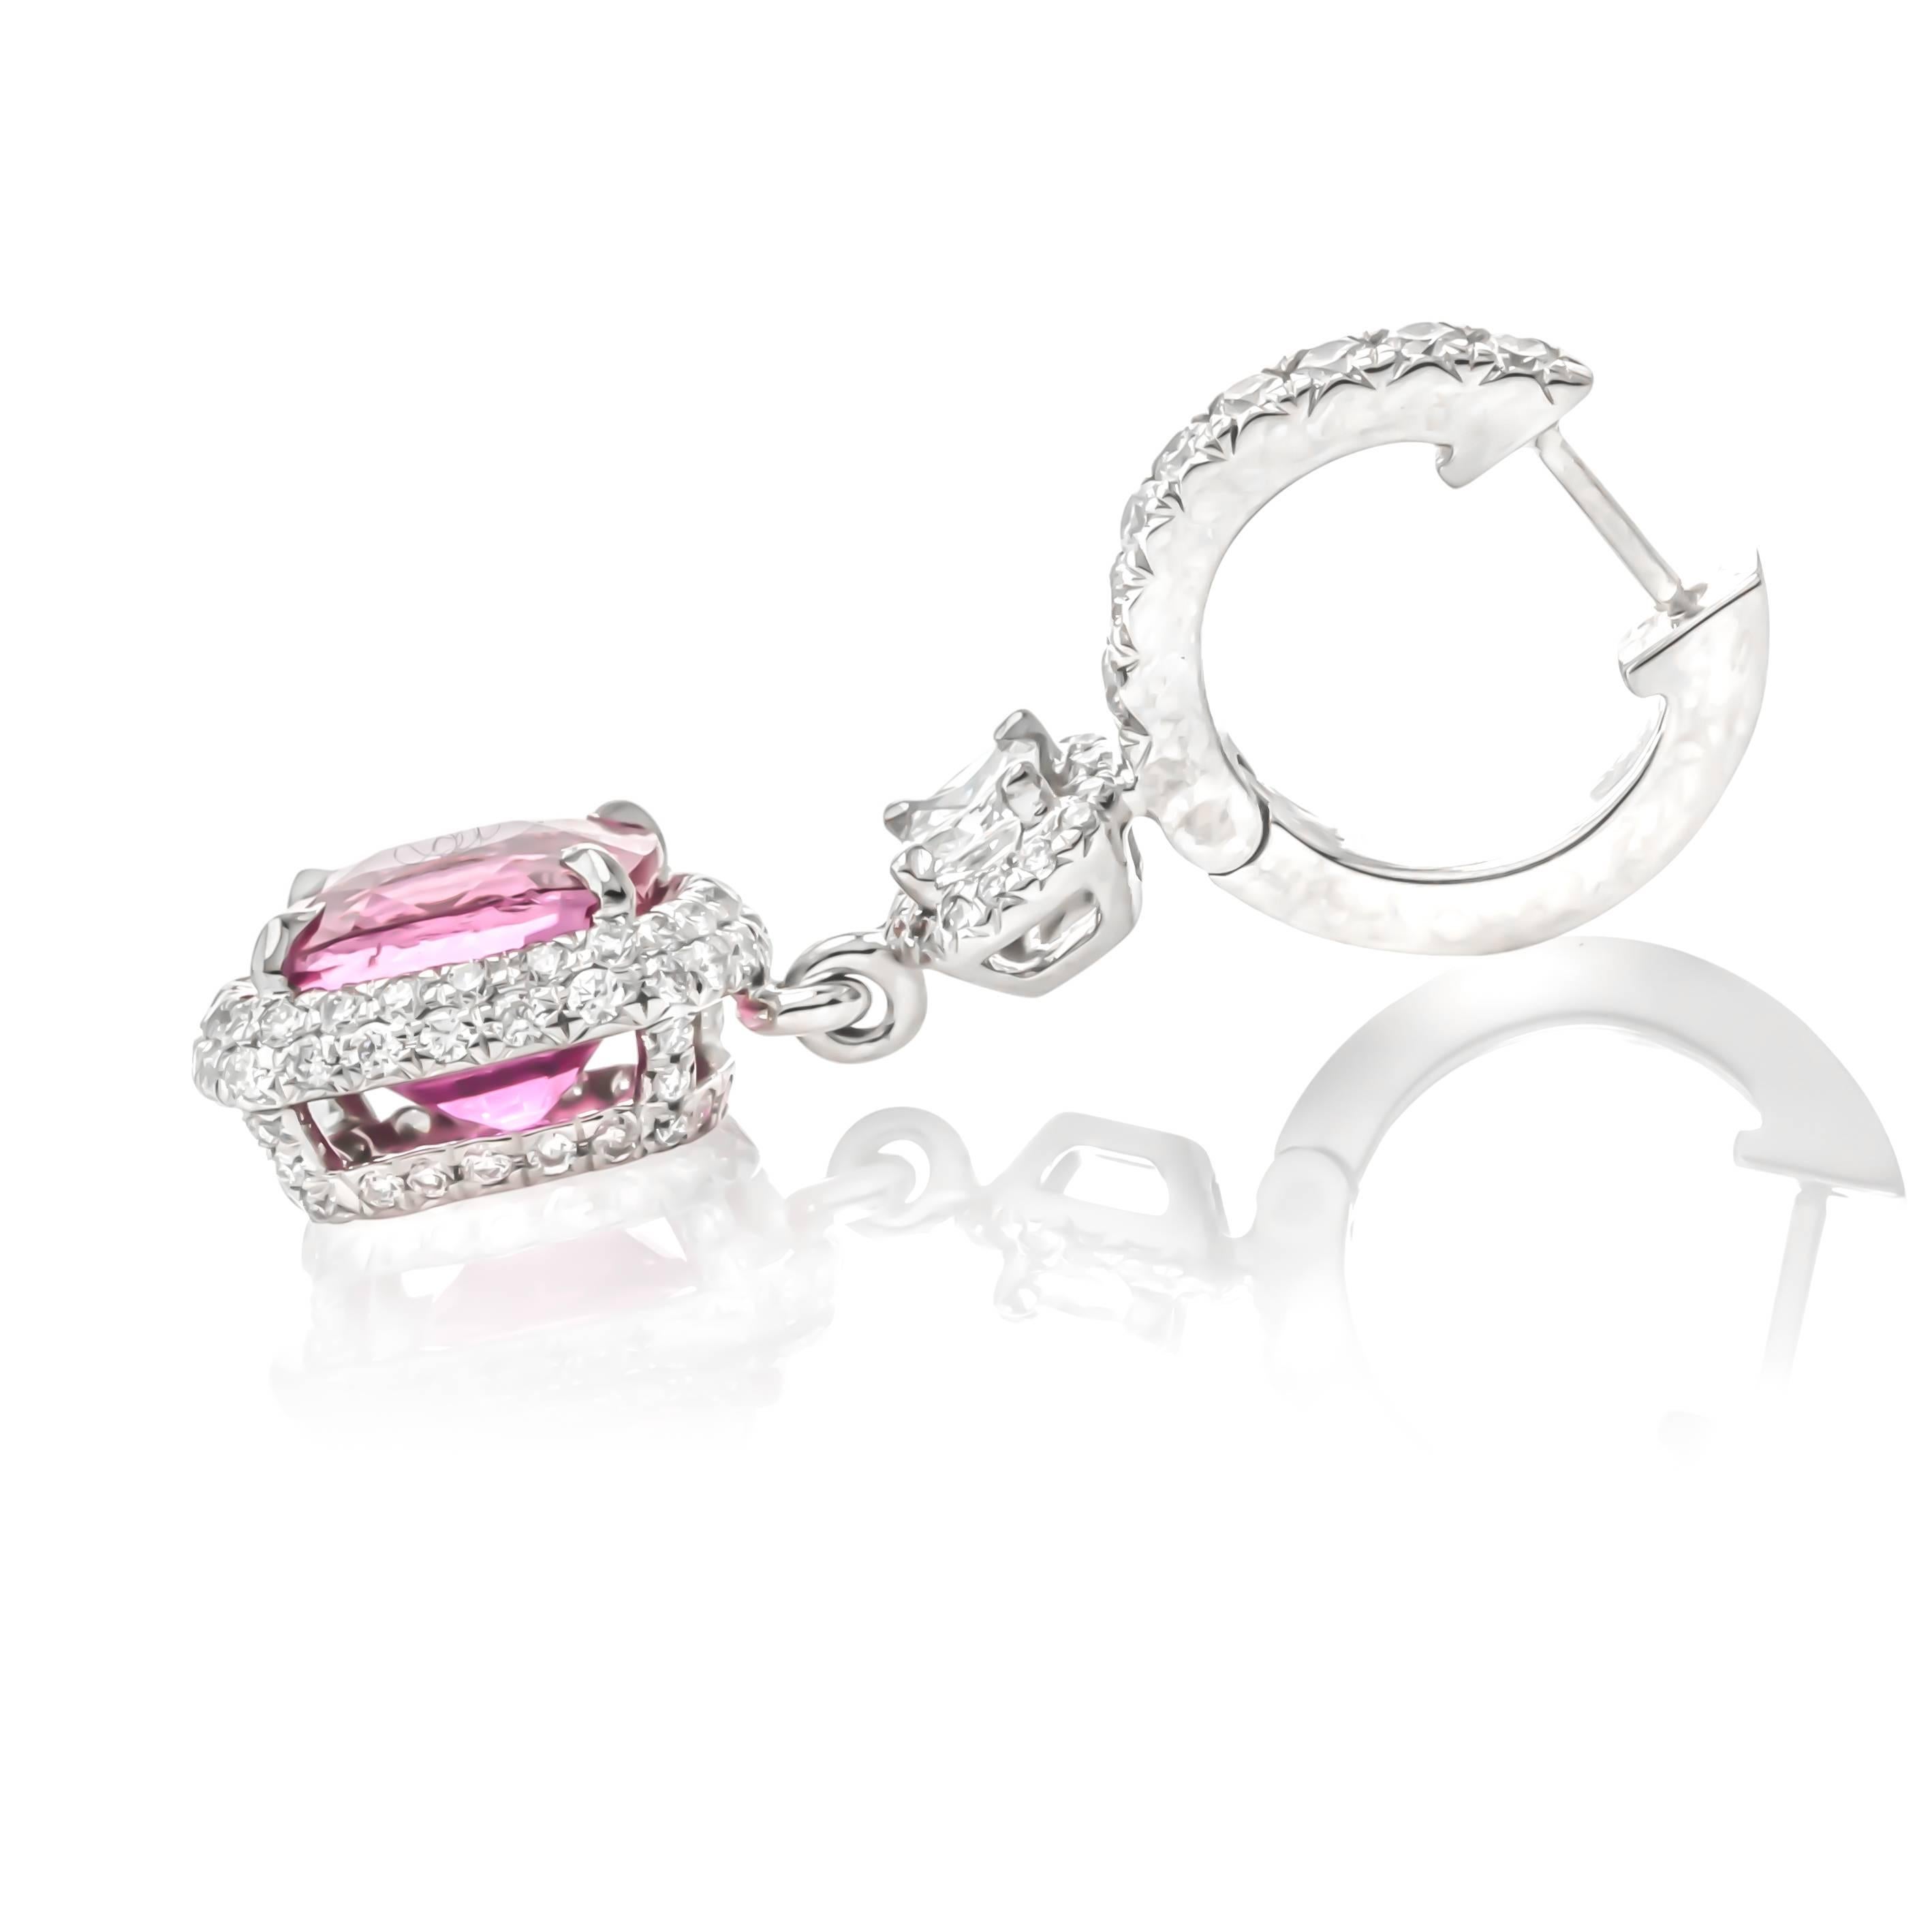 One of a Kind 5.03 Carat Pink Sapphire Diamond Earrings For Sale 4